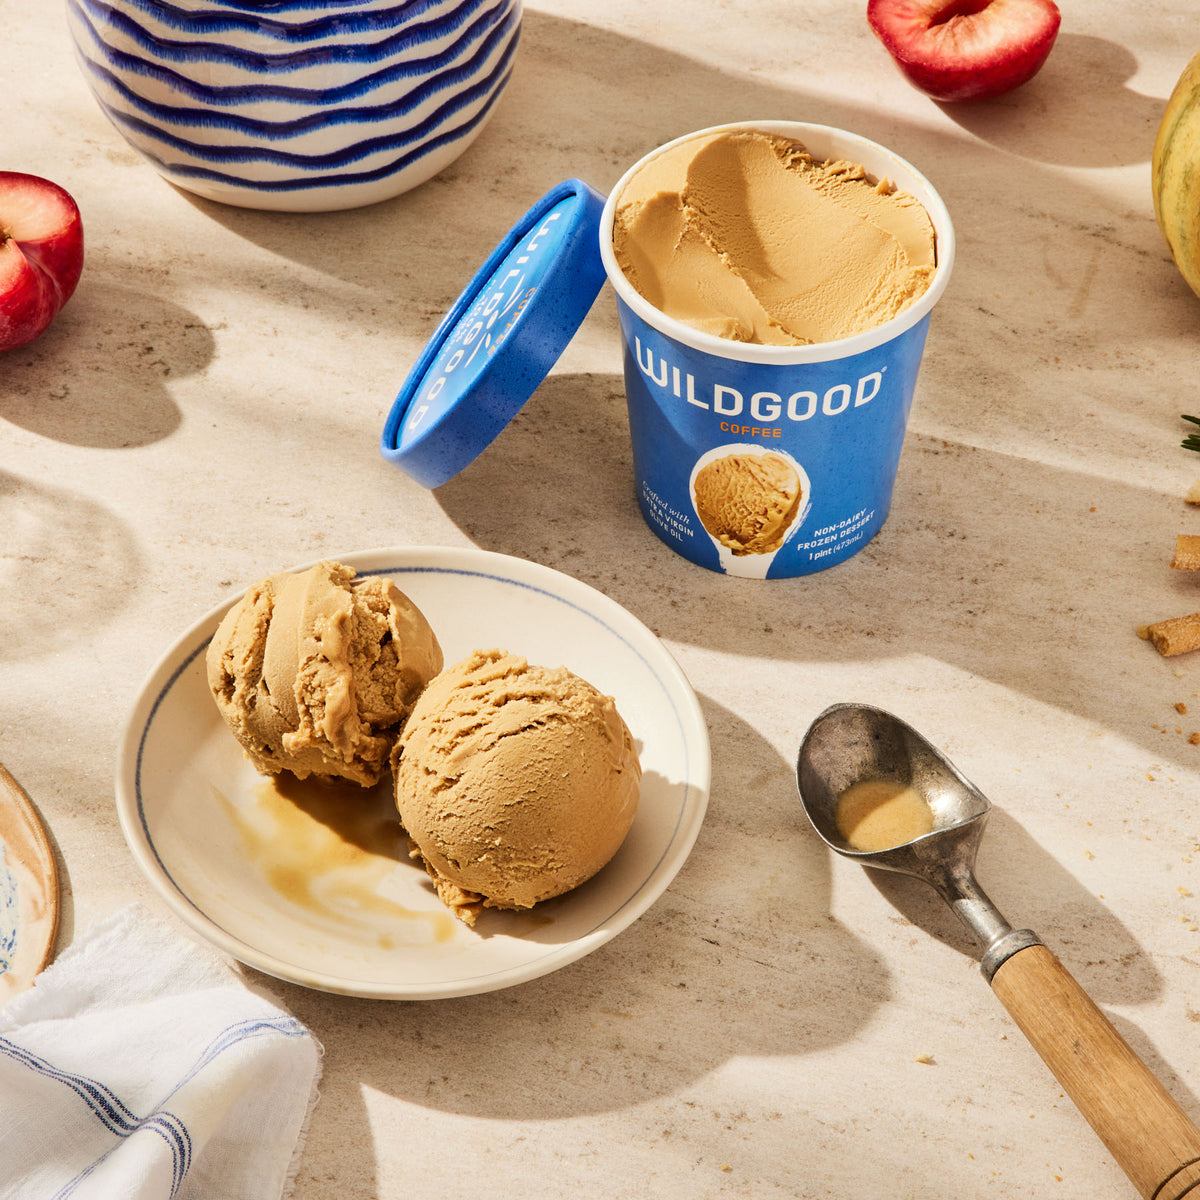 Wildgood plant-based ice cream made with extra virgin olive oil coffee